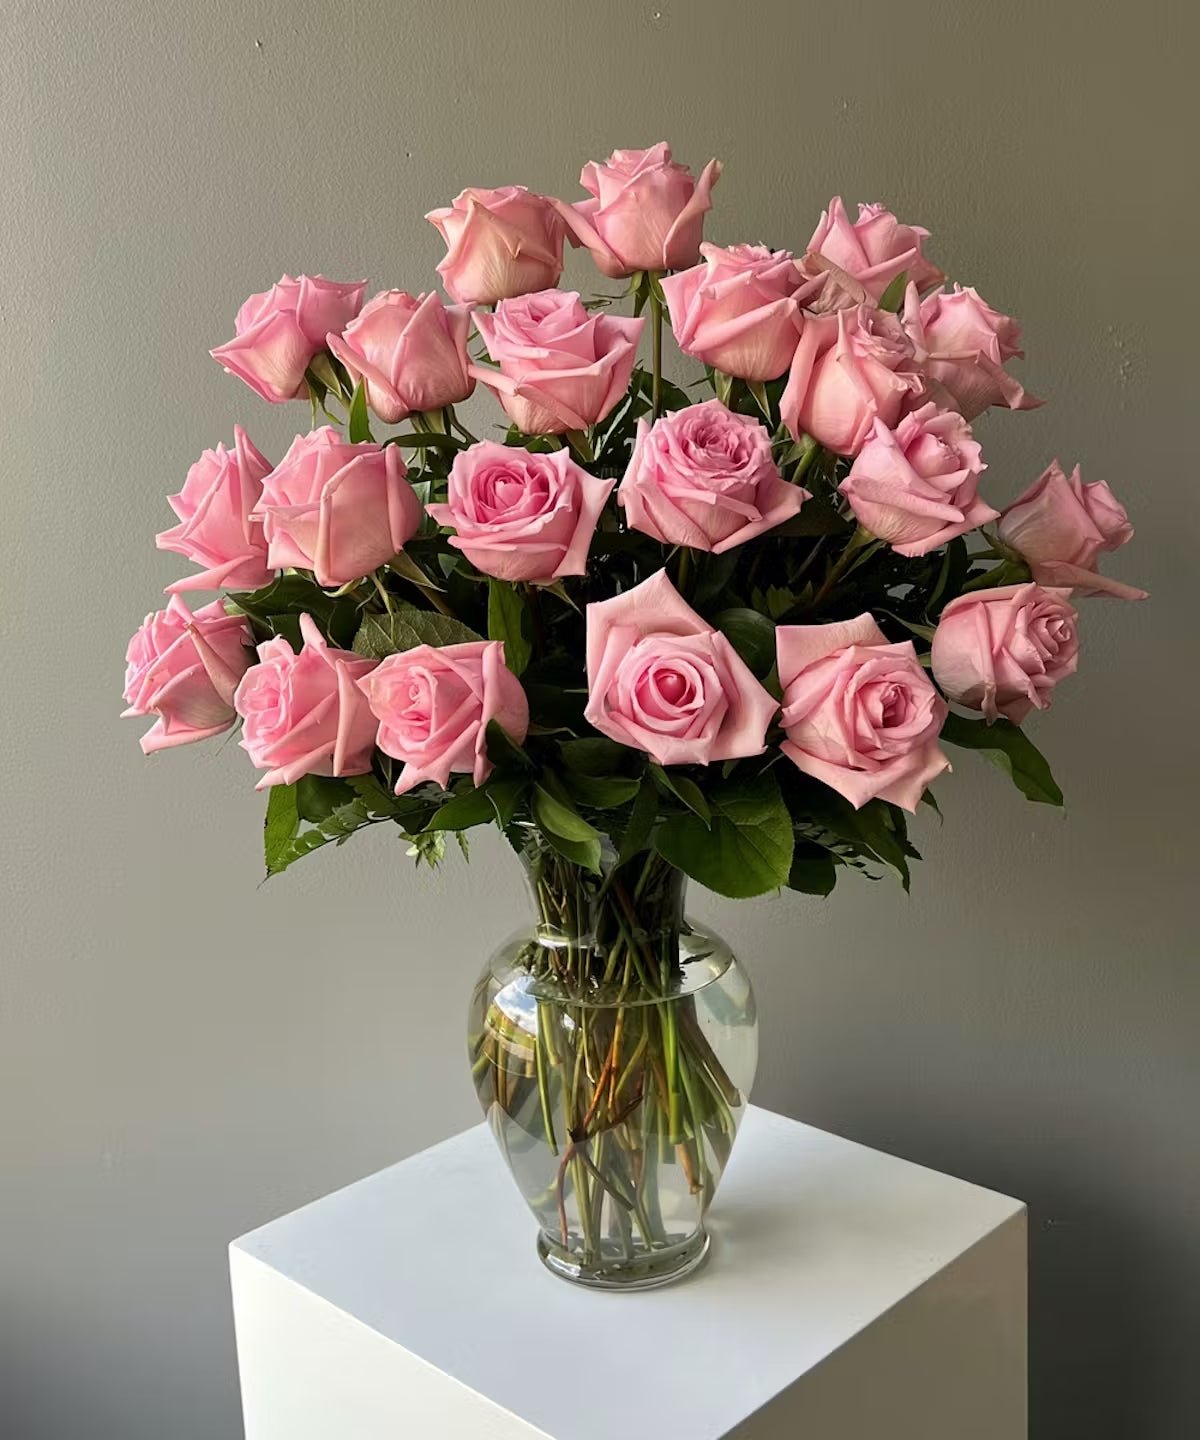 Light Pink Roses in a Vase - Lily's Bloom Boutique